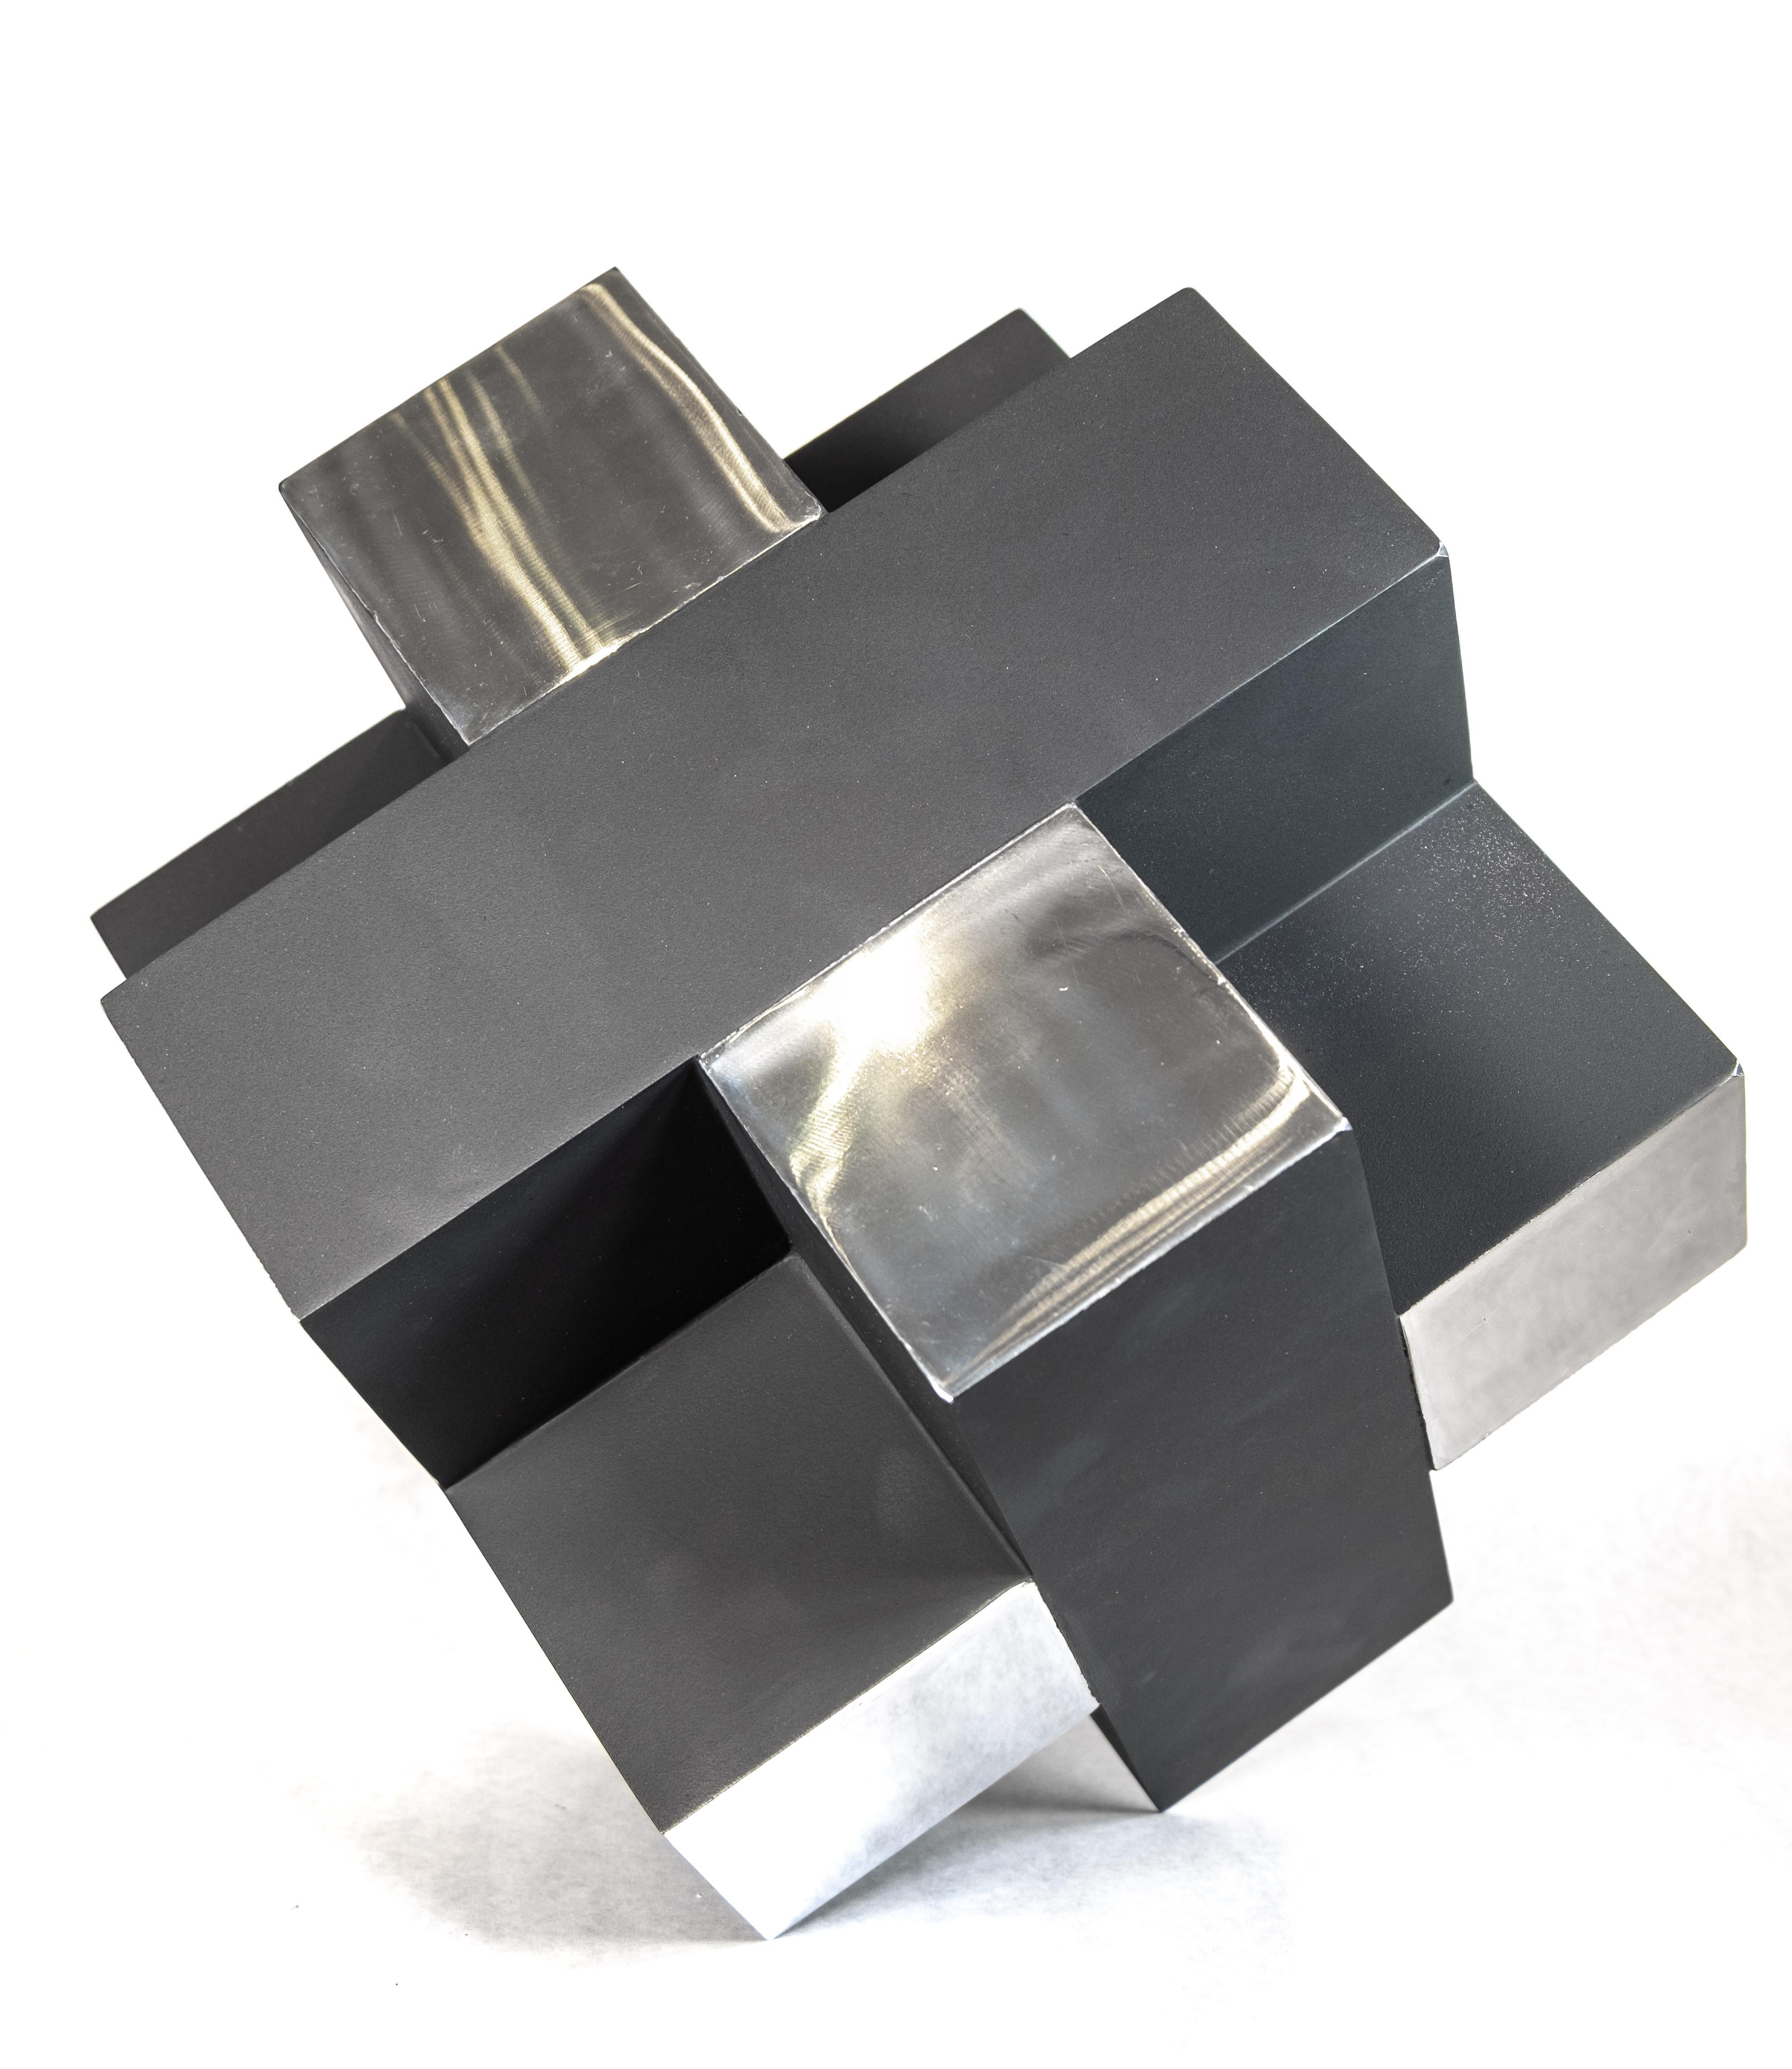 Philippe Pallafray Abstract Sculpture - 12 Inch Cube Black 1/10 - modern, intersecting geometric, aluminum sculpture